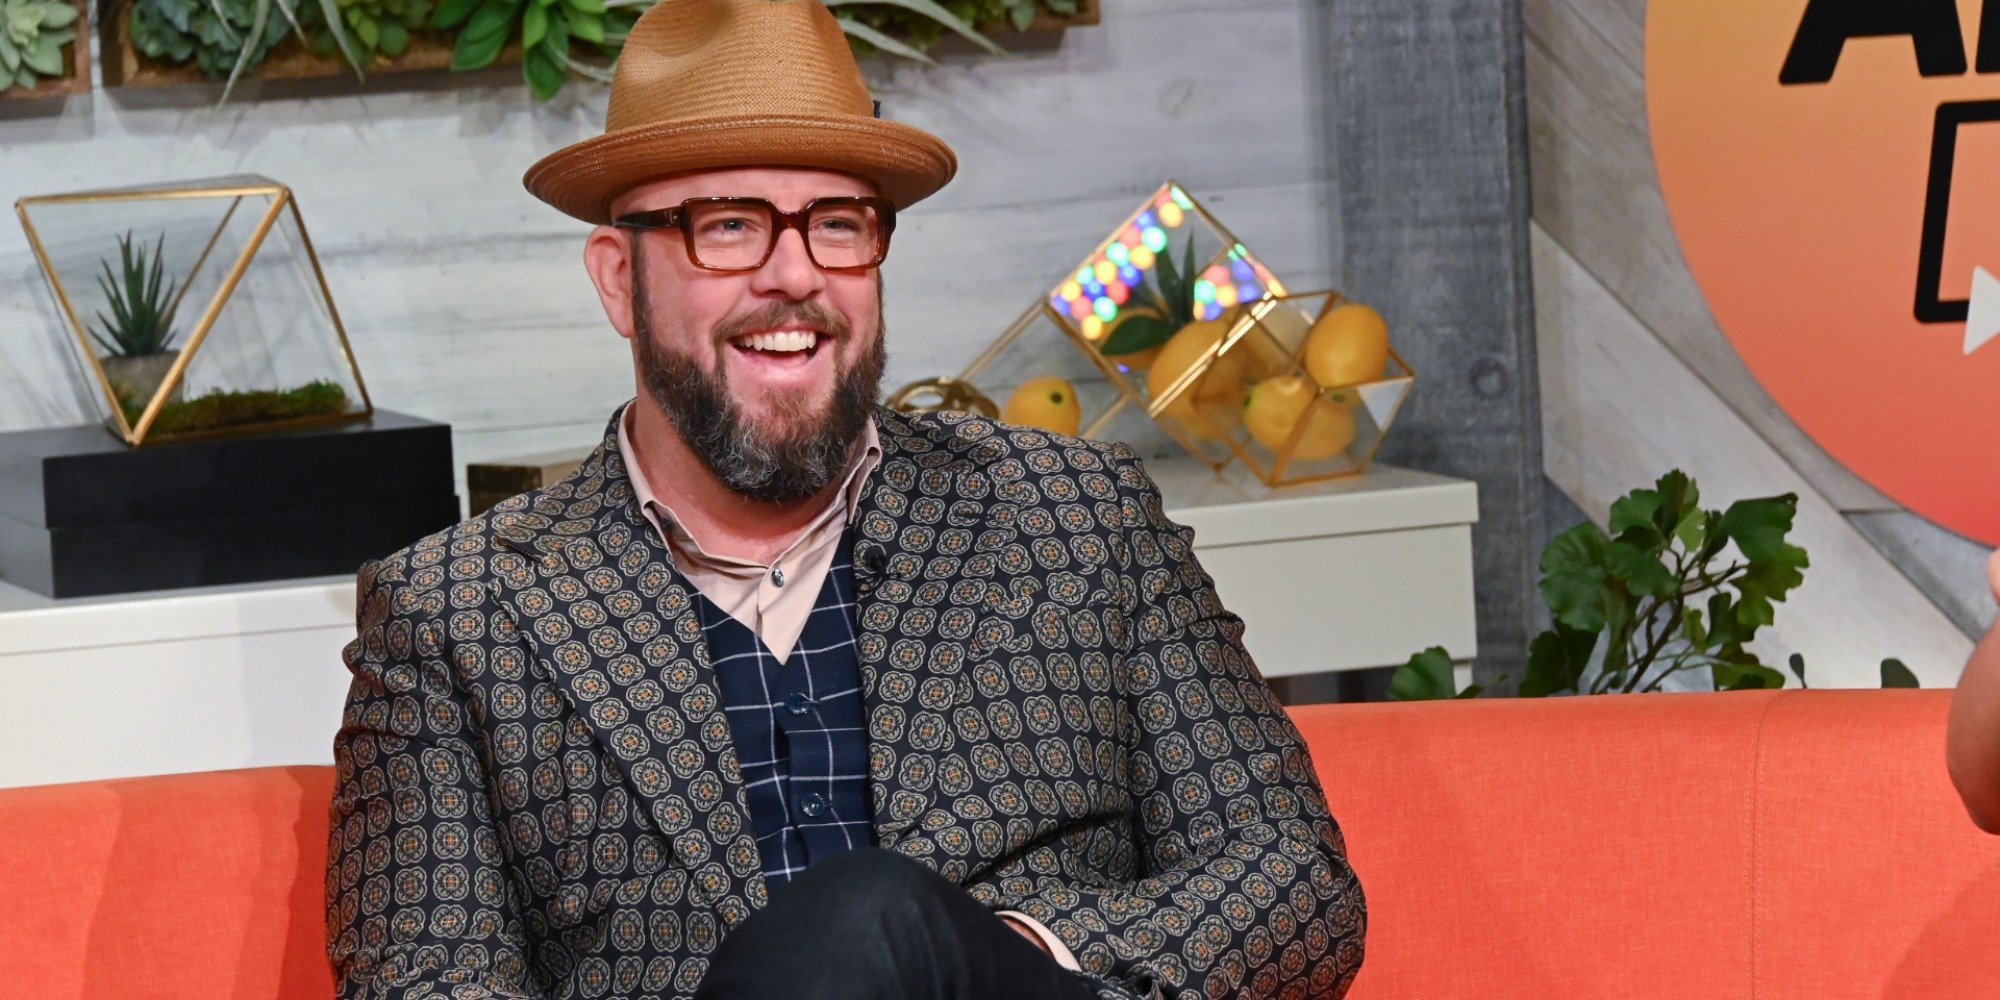 'This Is Us' star Chris Sullivan poses for a photo wearing a hat and checkered coat.